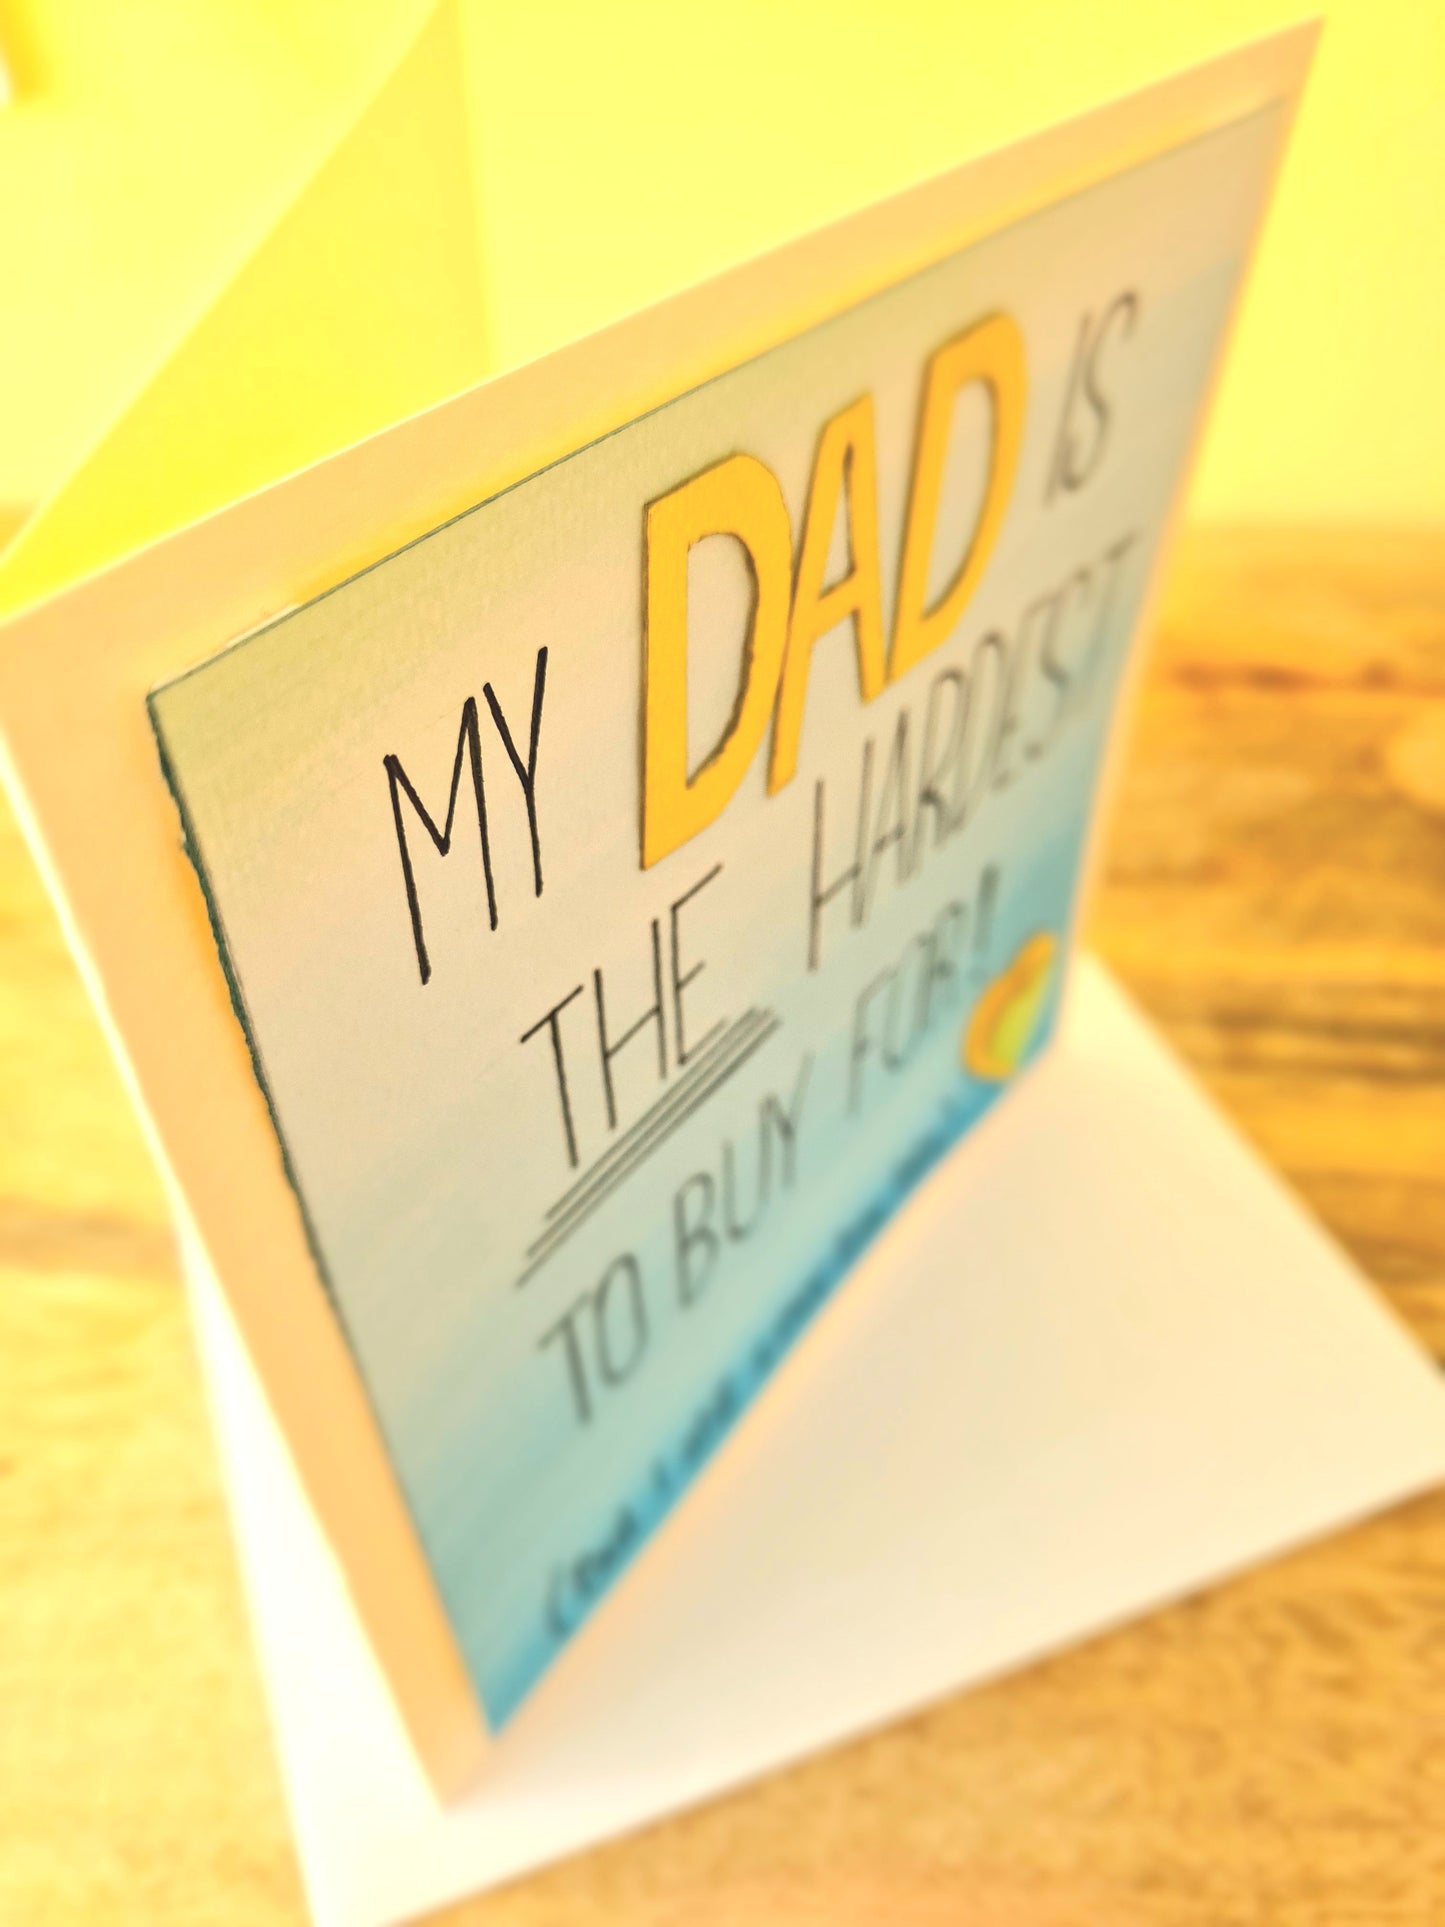 These personalised cards are ideal gifts for dad's bday. They are also perfect for Fathers Day. We are positive that your father will LOVE THIS!